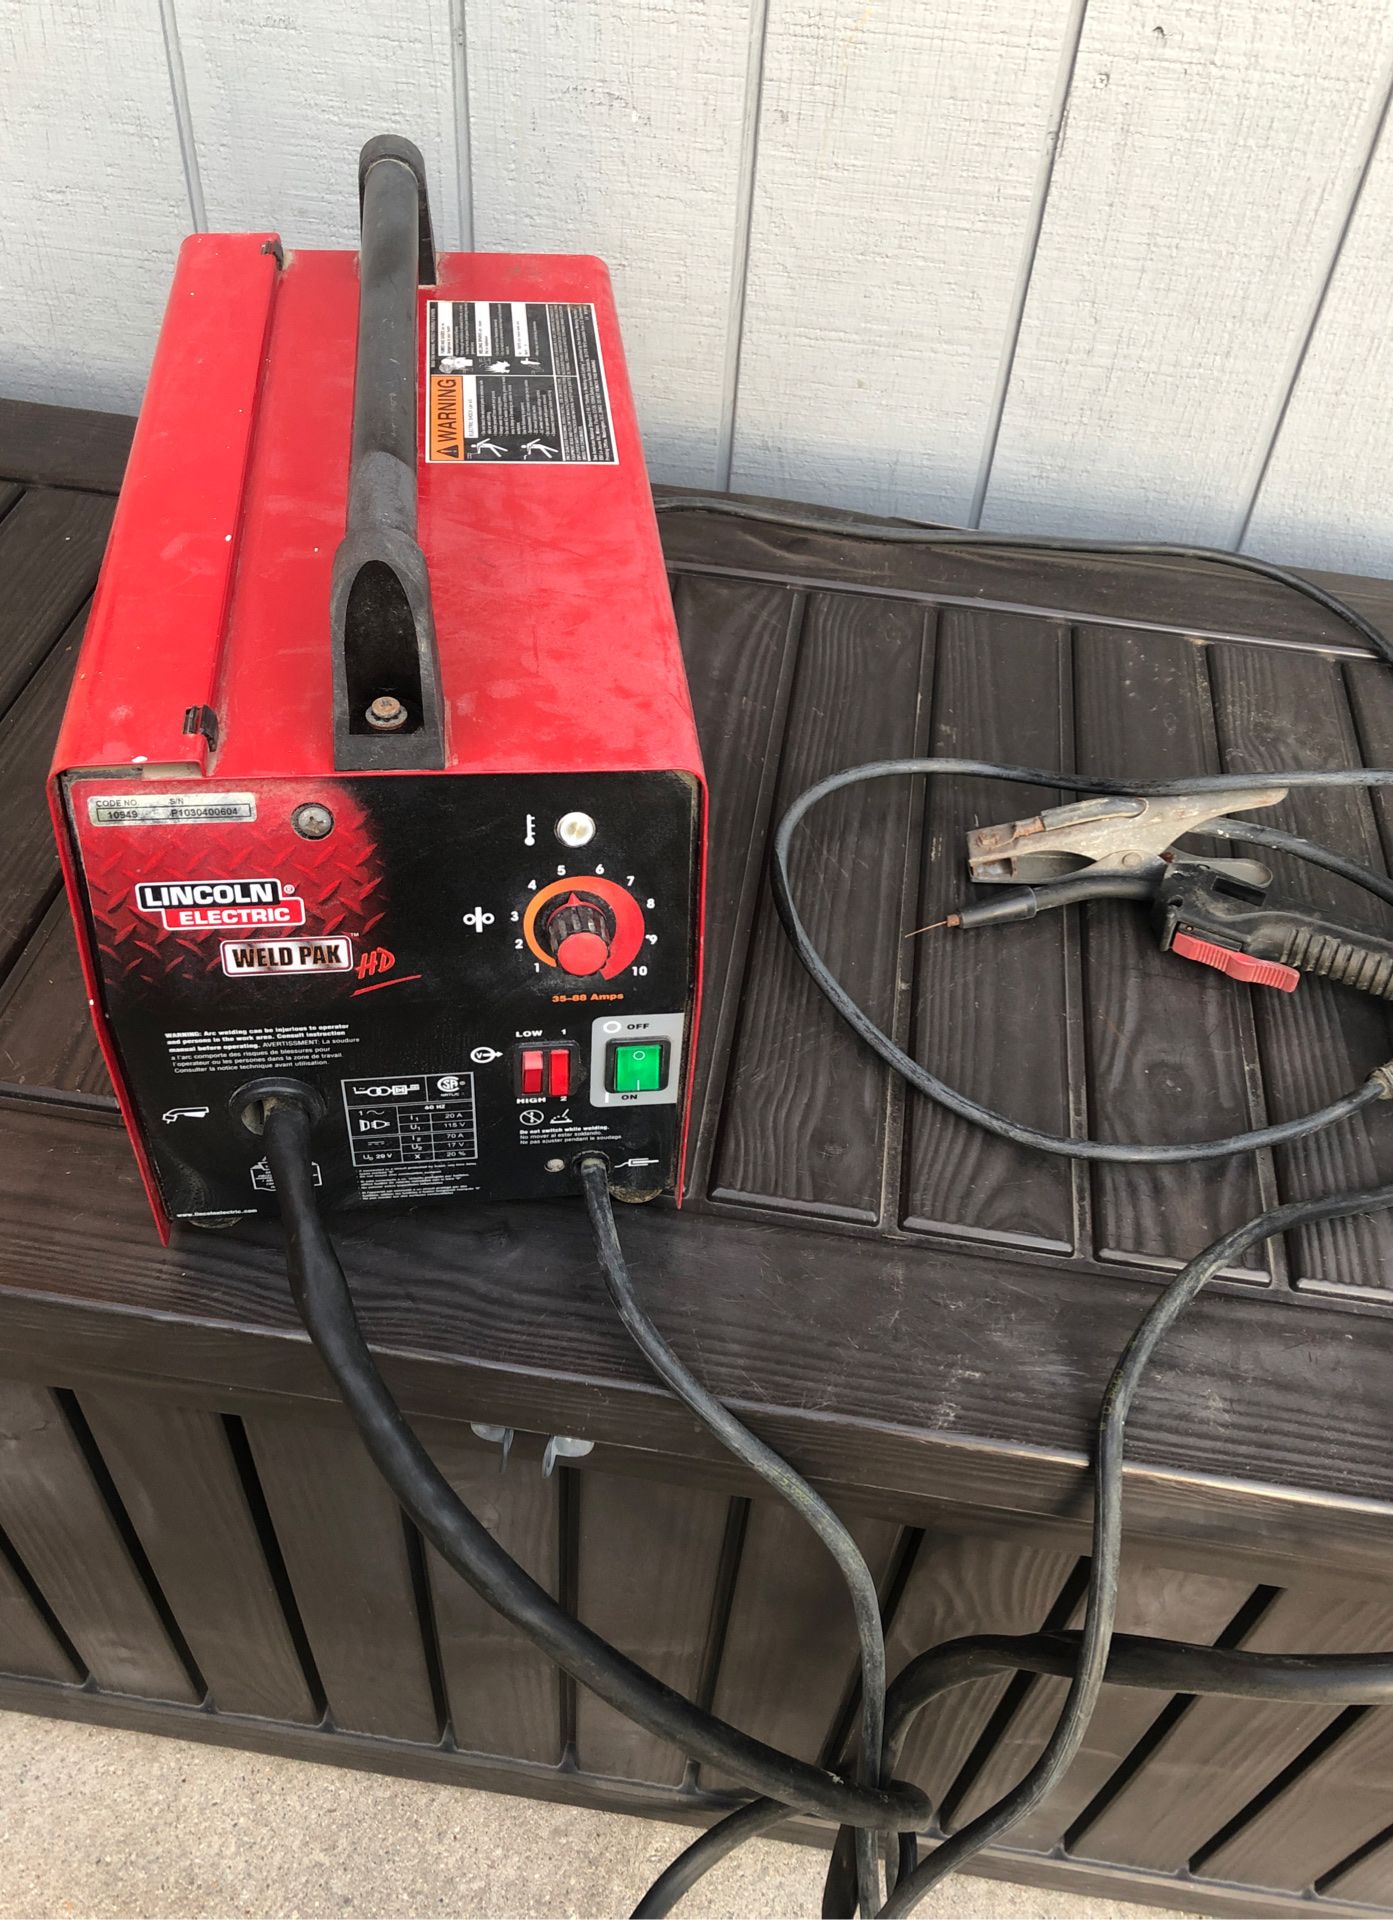 PENDING PICK UP Lincoln electric weld pak $60